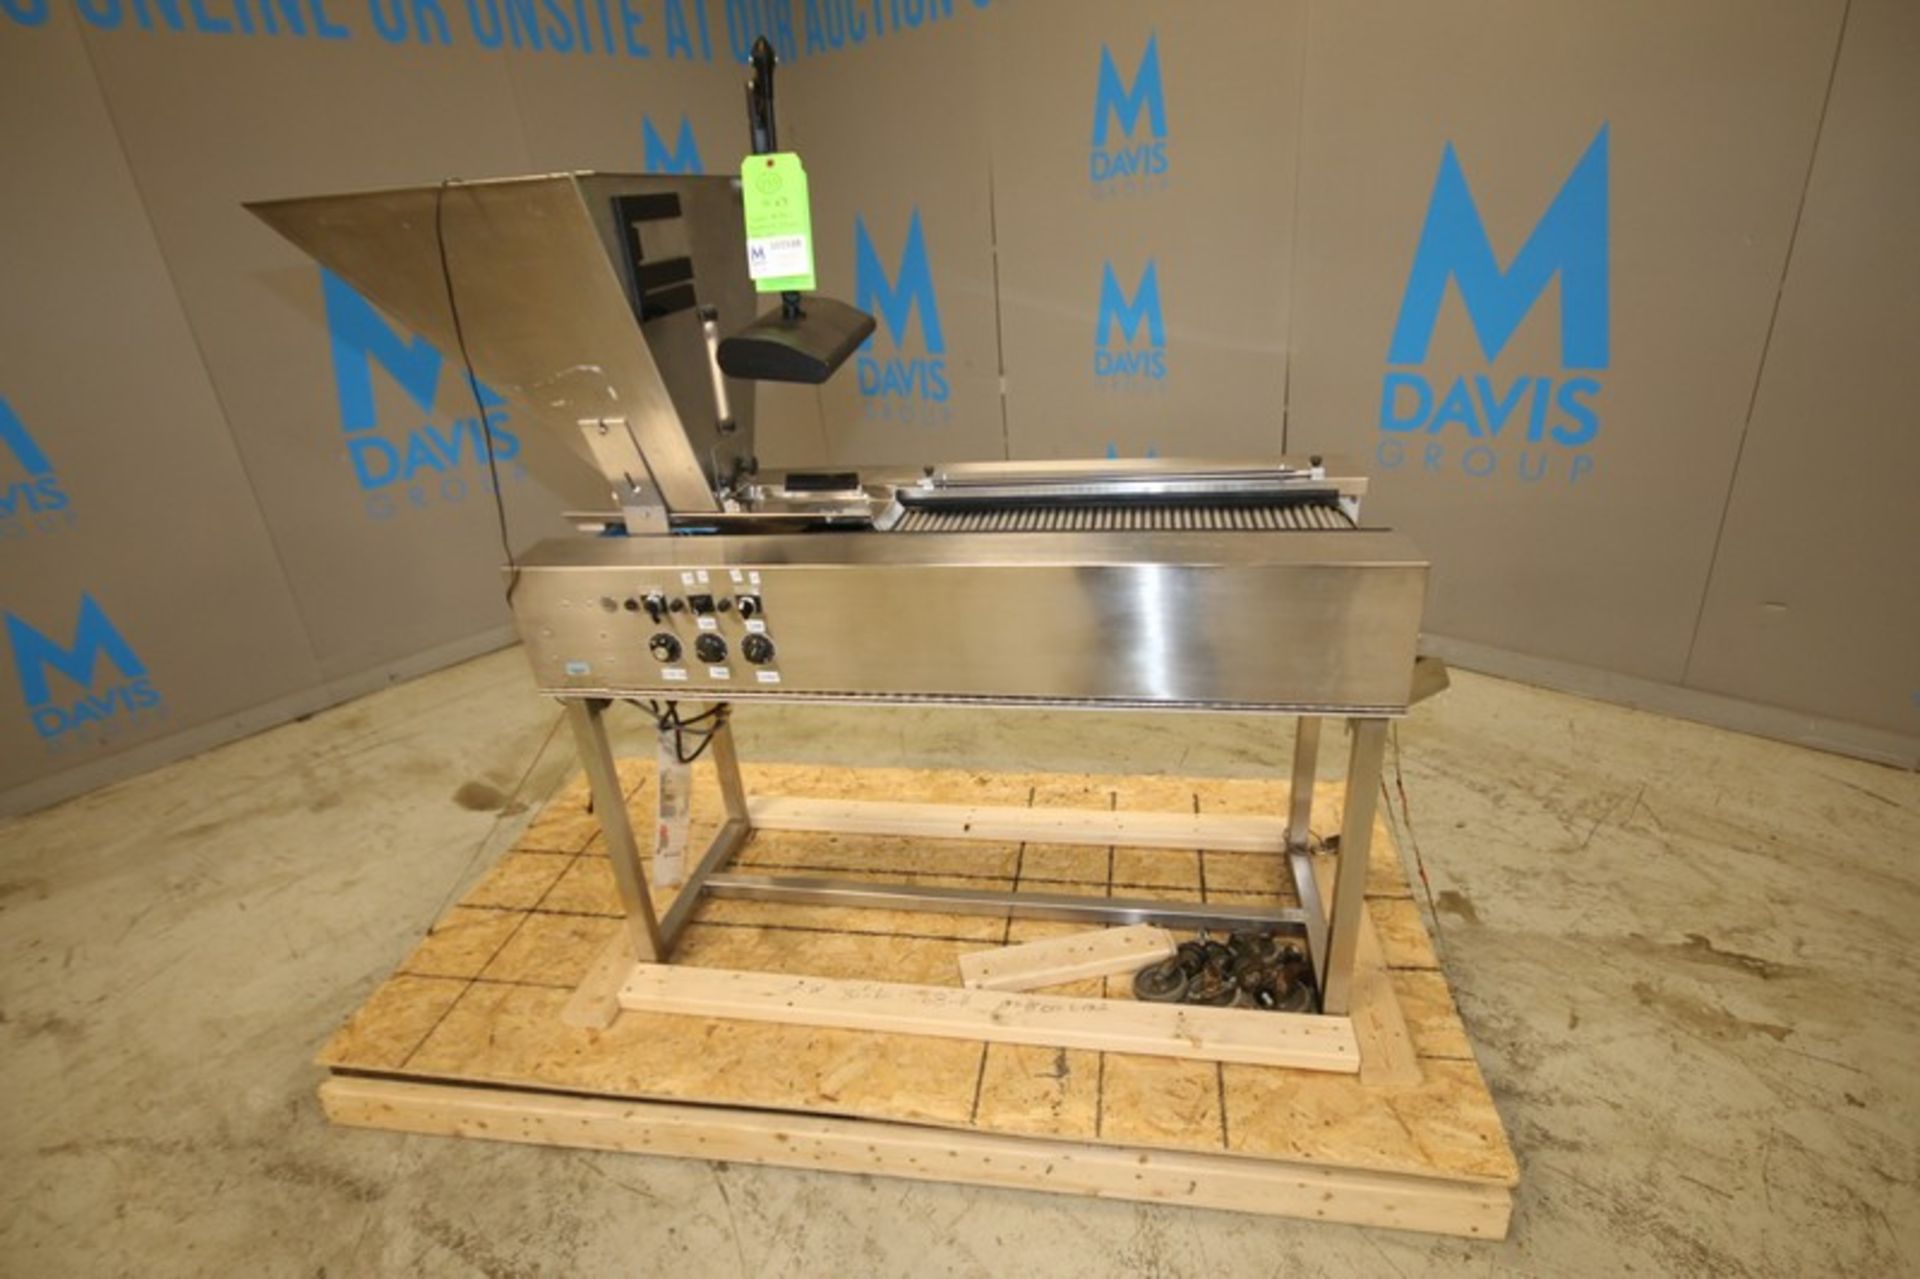 Aprox. 52" W x 23" W x 34" H Tablet Roller / Inspection / Feeder Station, with 7.75" W Roller